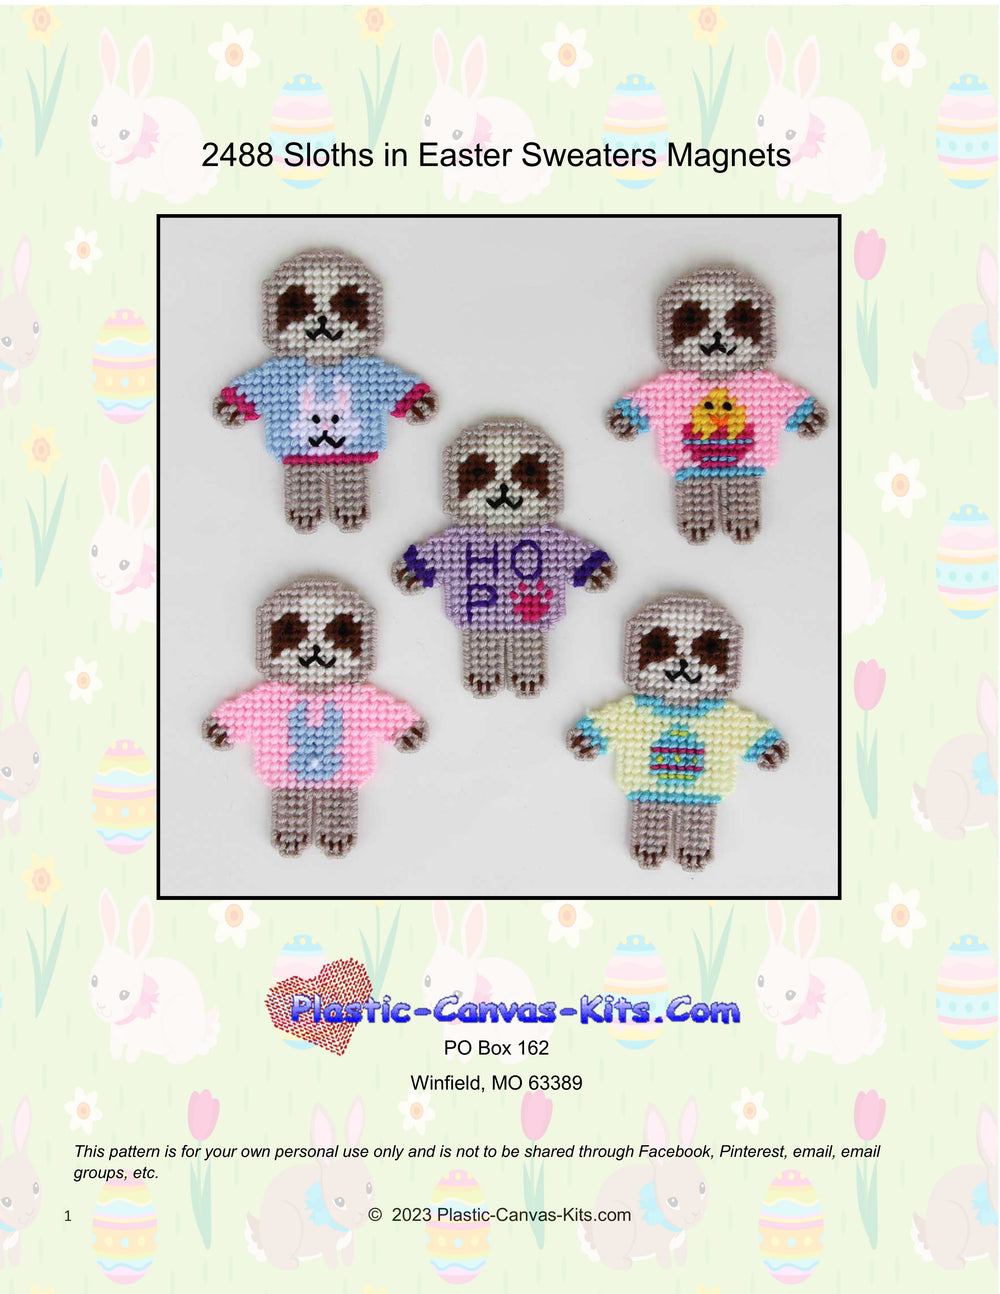 Sloths in Easter Sweaters Magnets